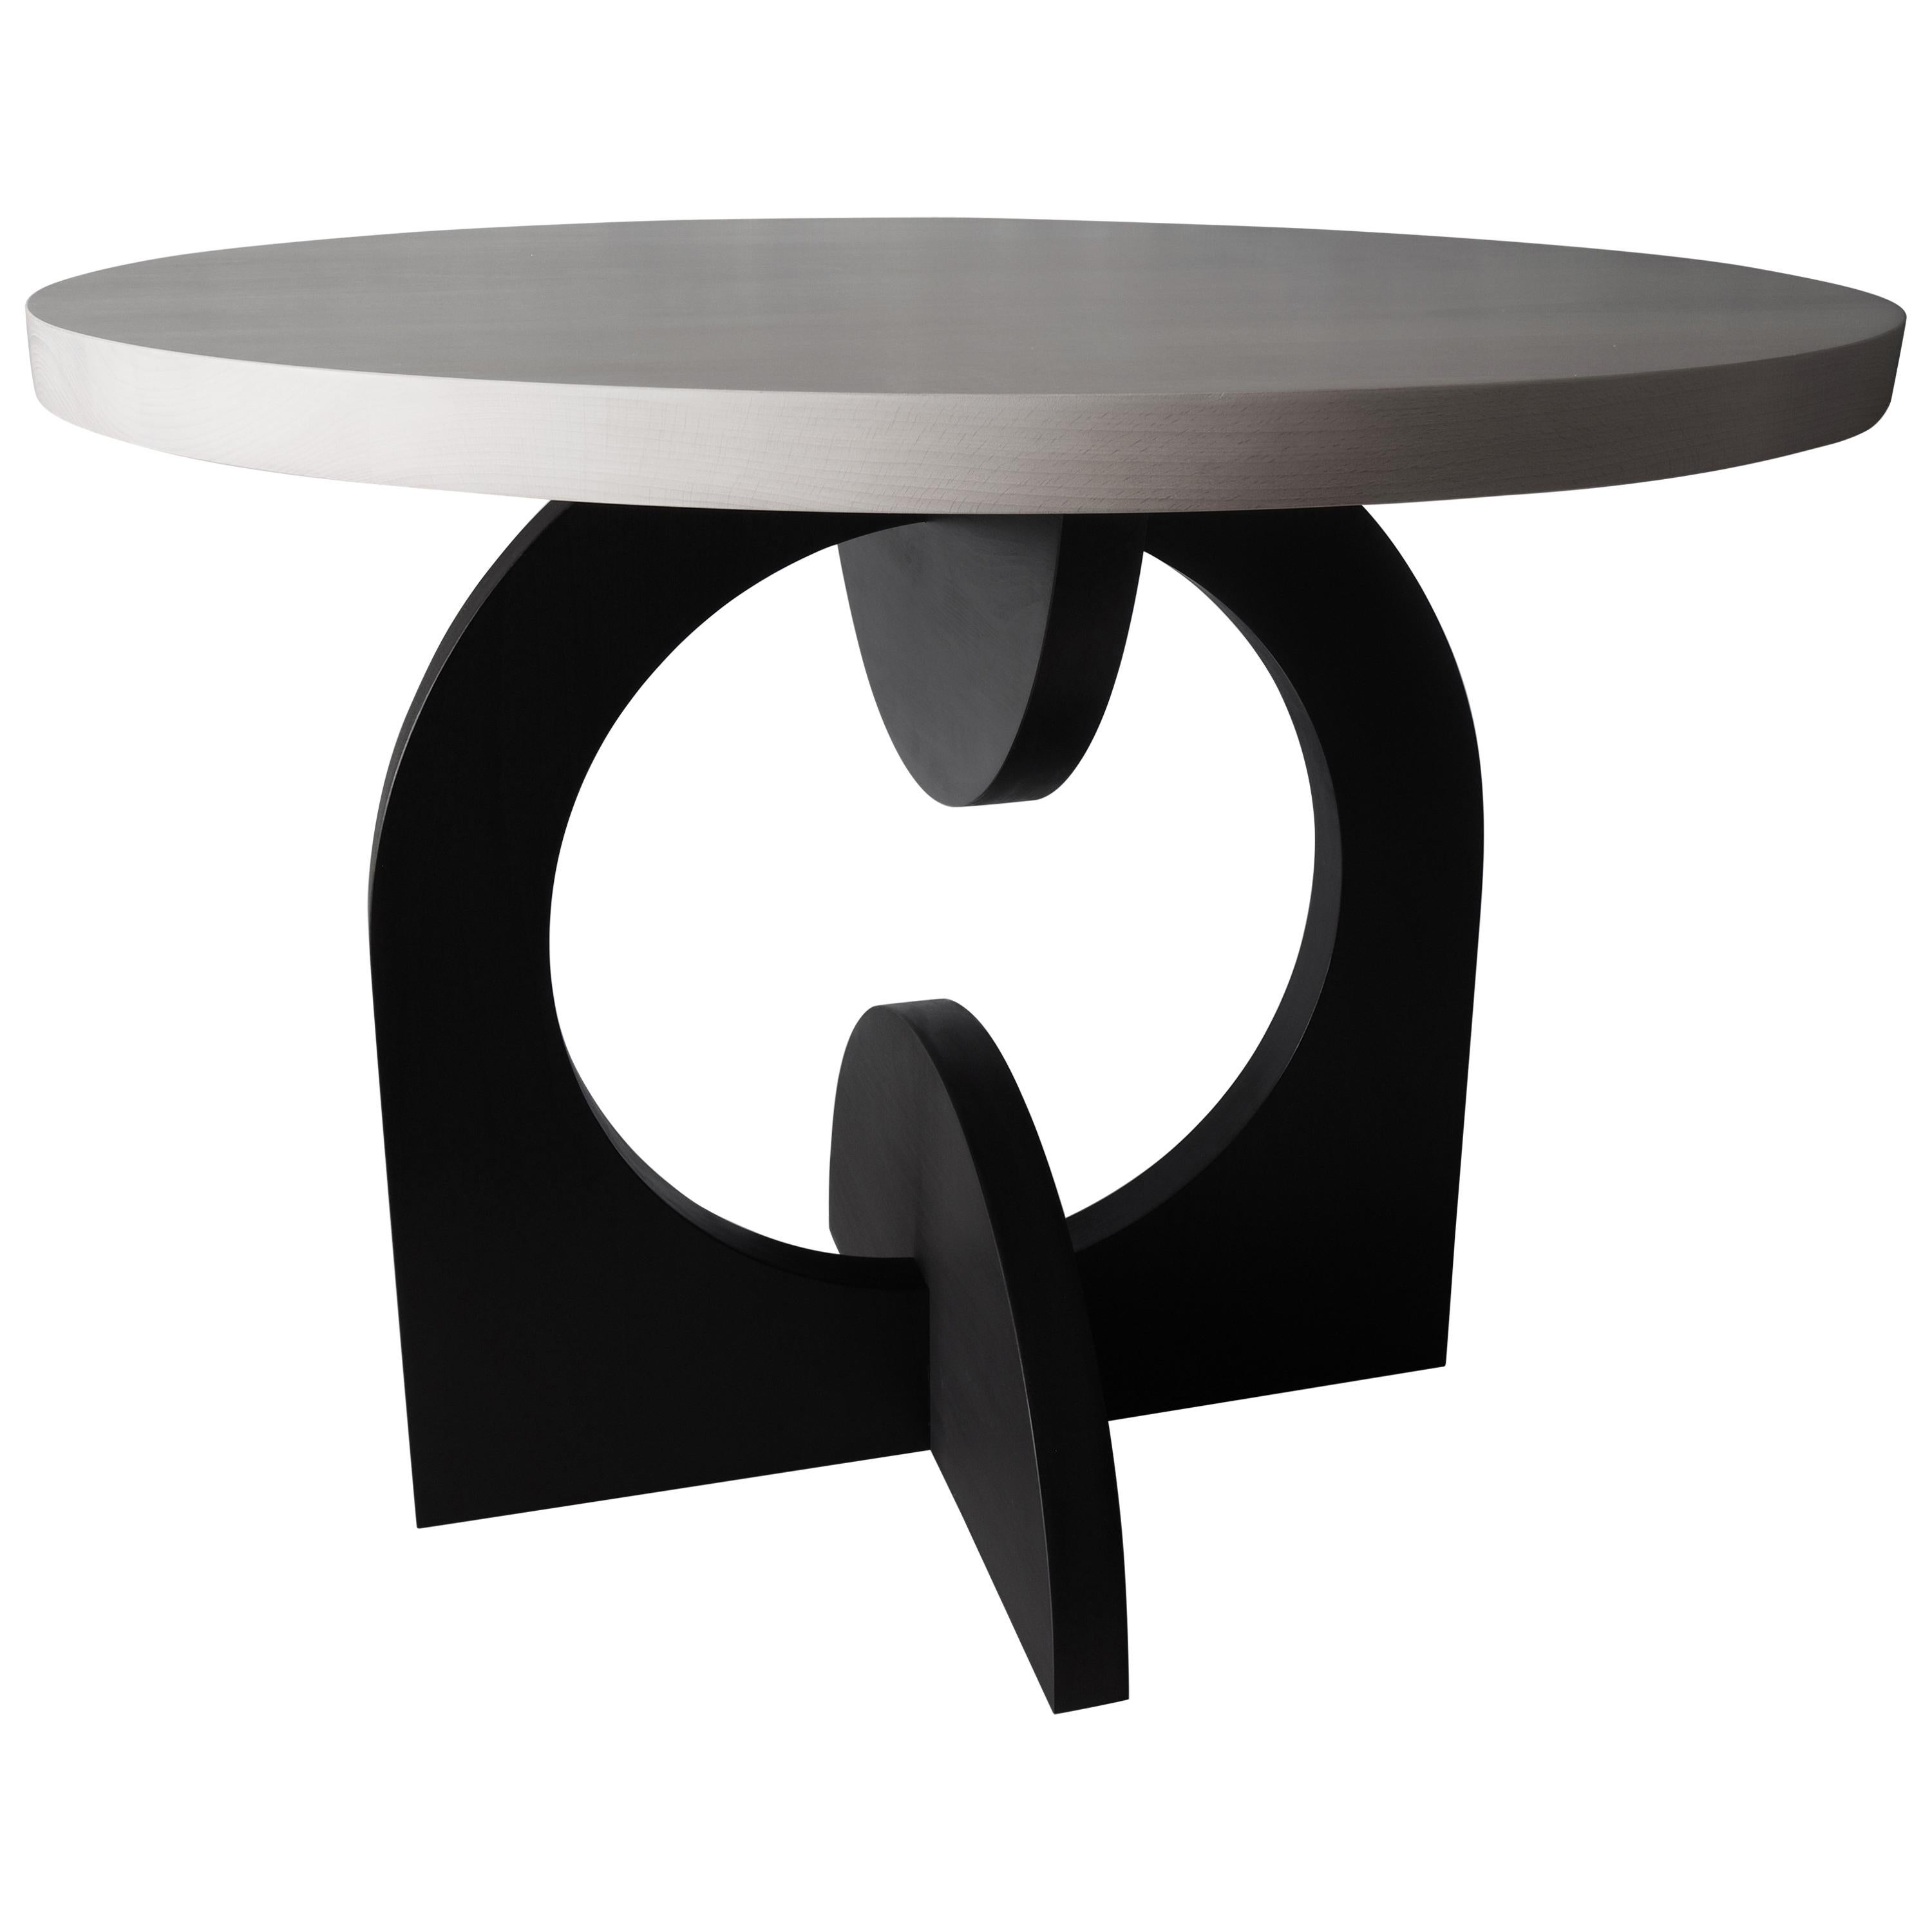 India Ink and White Round Dual Crescent Table by MSJ Furniture Studio